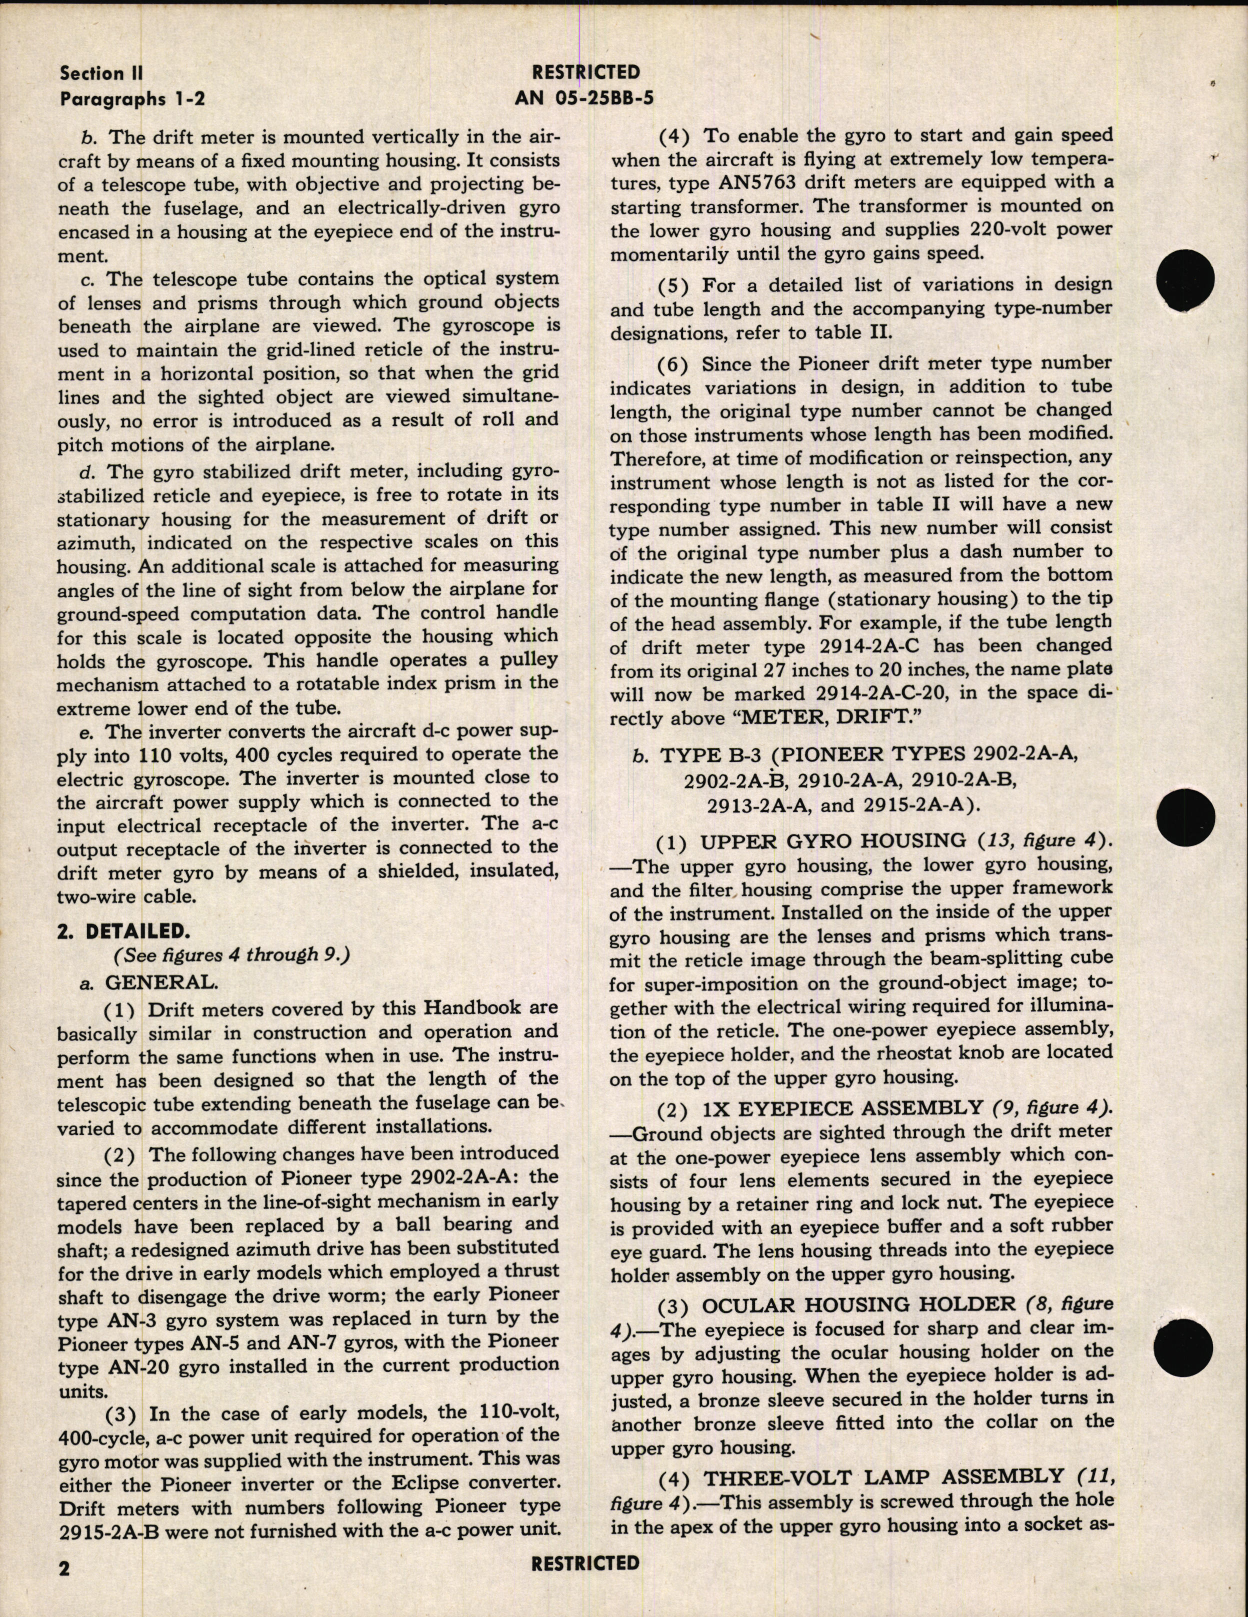 Sample page 6 from AirCorps Library document: Operation and Service Instructions for Drift Meters Type B-3 (Navy R88-S-872-27, -40, -51, -53, -60)